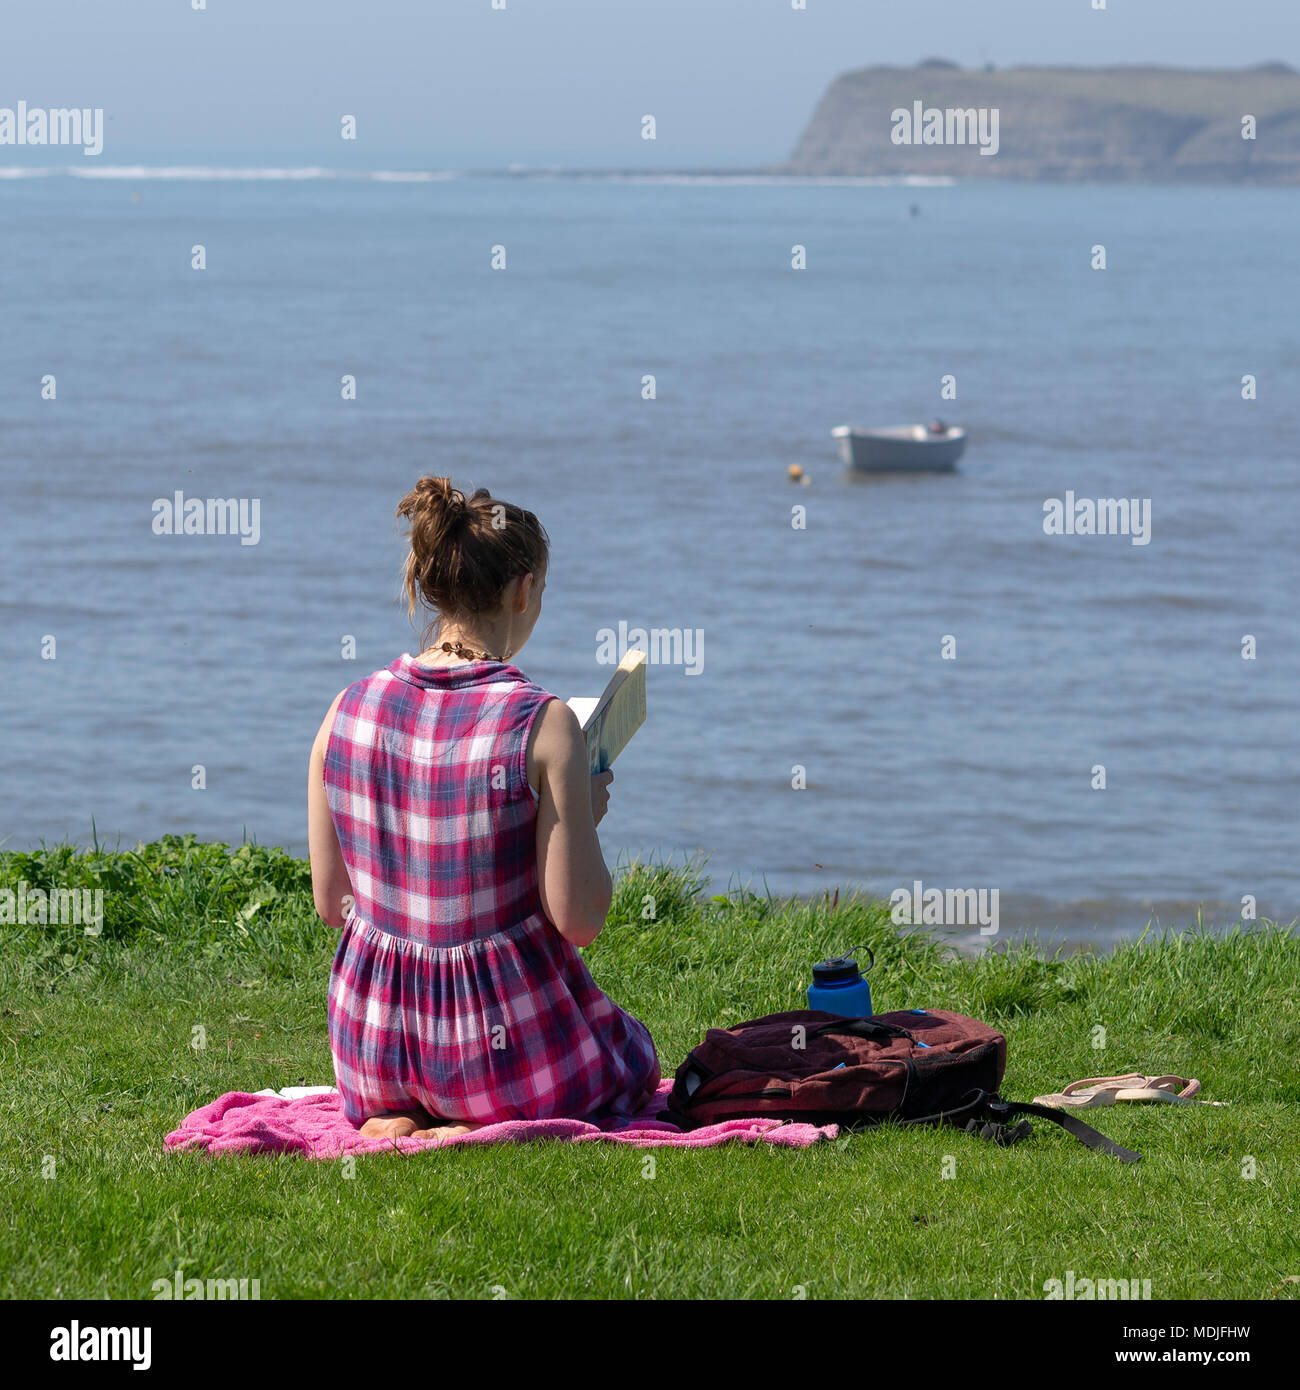 A young woman in a checked dress sitting on a blanket on a grassy cliff overlooking the sea and reading a book in sunny weather. Stock Photo